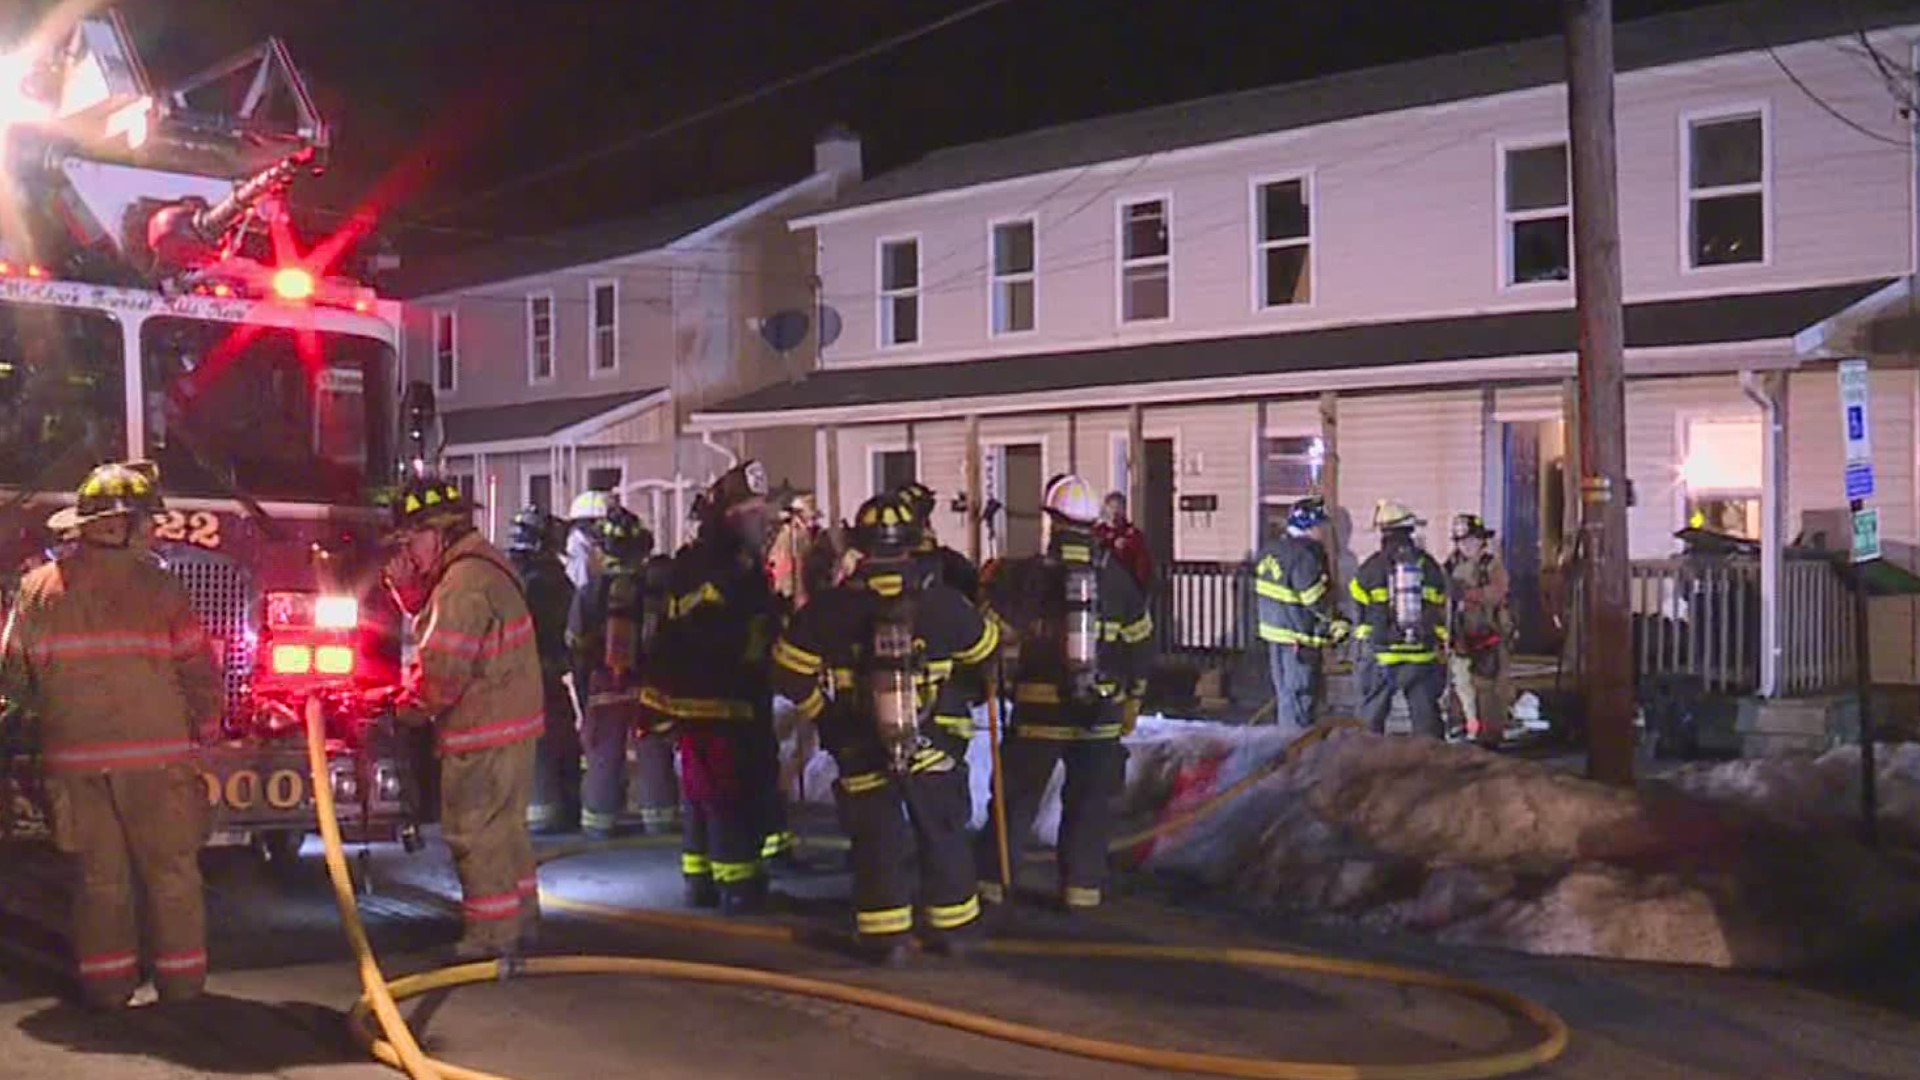 A toddler was taken to the hospital after a fire in Schuylkill County Thursday morning.